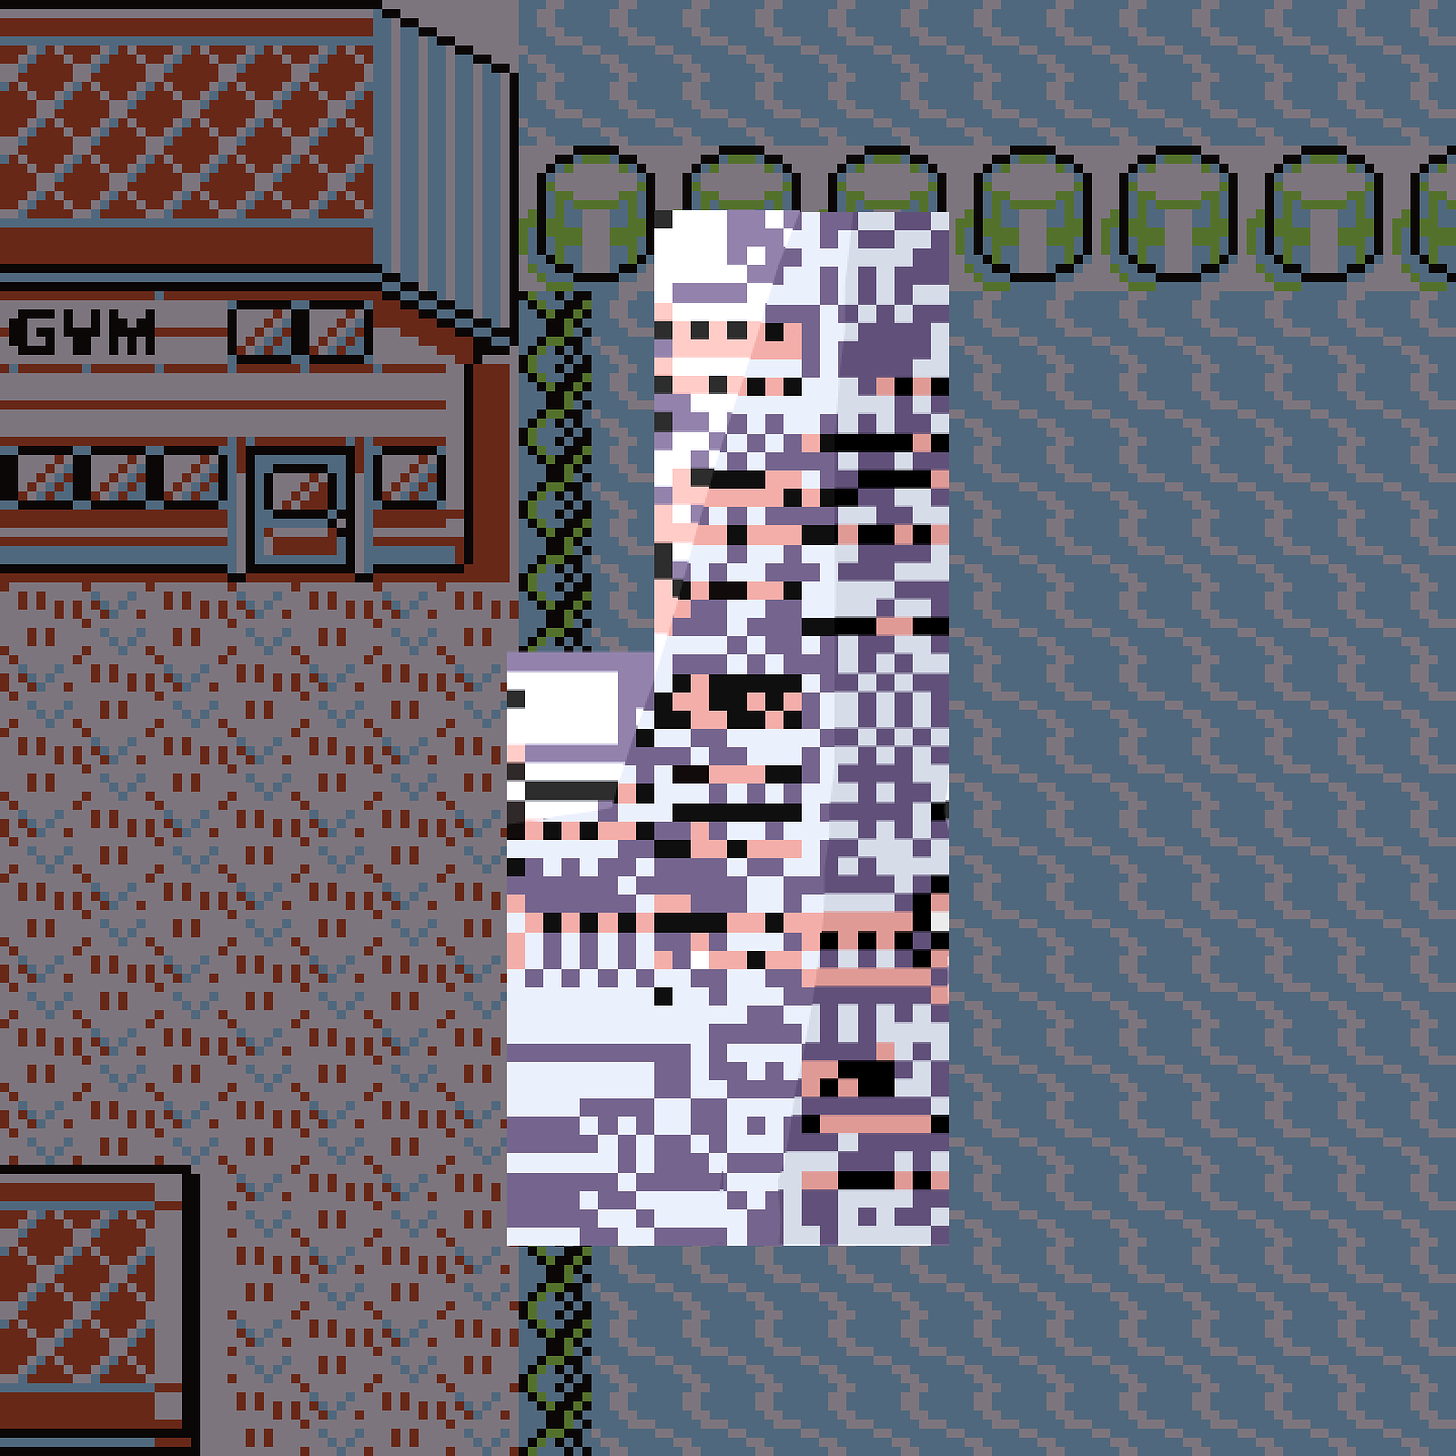 Missingno., and 'M or "Missing Number" were glitches that could be encountered in Pokémon Red, Blue, and Yellow that had the potential to corrupt save files. It was closely associated with PokéGod rumours, suggested being a fourth legendary bird in the first generation of games.